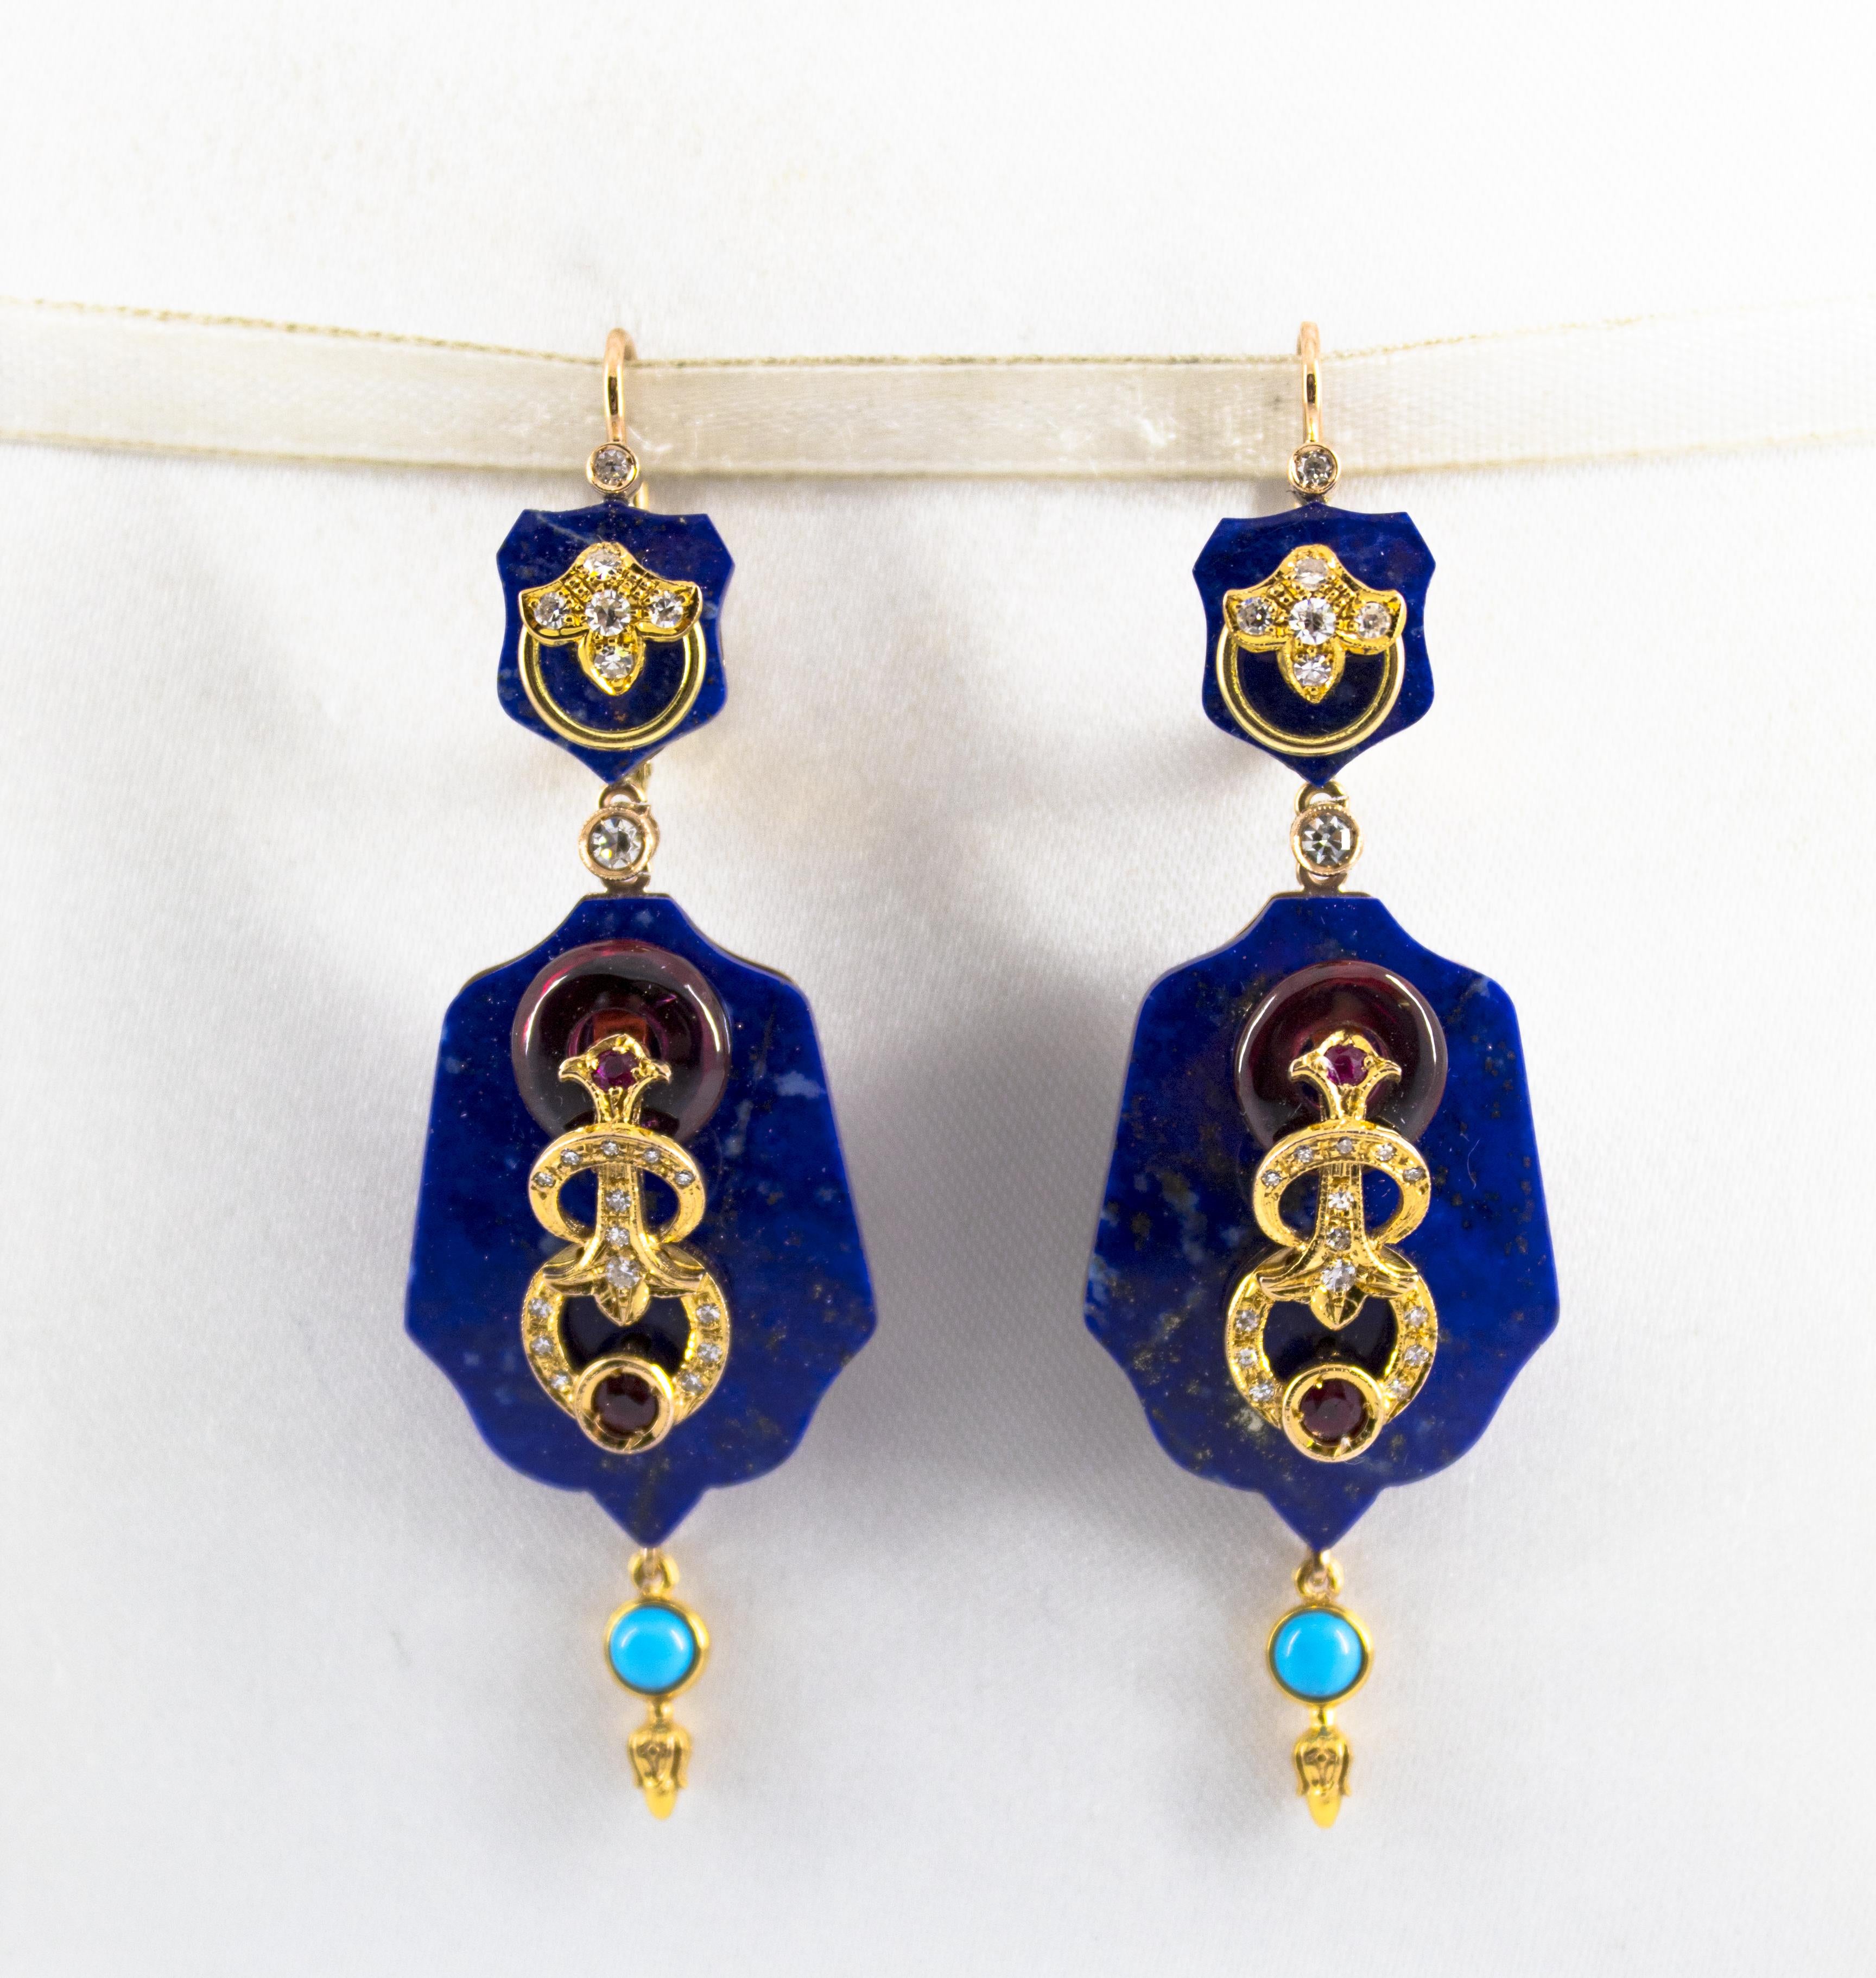 These Earrings are made of 14K Yellow Gold.
These Earrings have 0.50 Carats of White Diamonds.
These Earrings have 0.30 Carats of Rubies.
These Earrings have also Lapis Lazuli, Turquoise and Amethyst.
All our Earrings have pins for pierced ears but